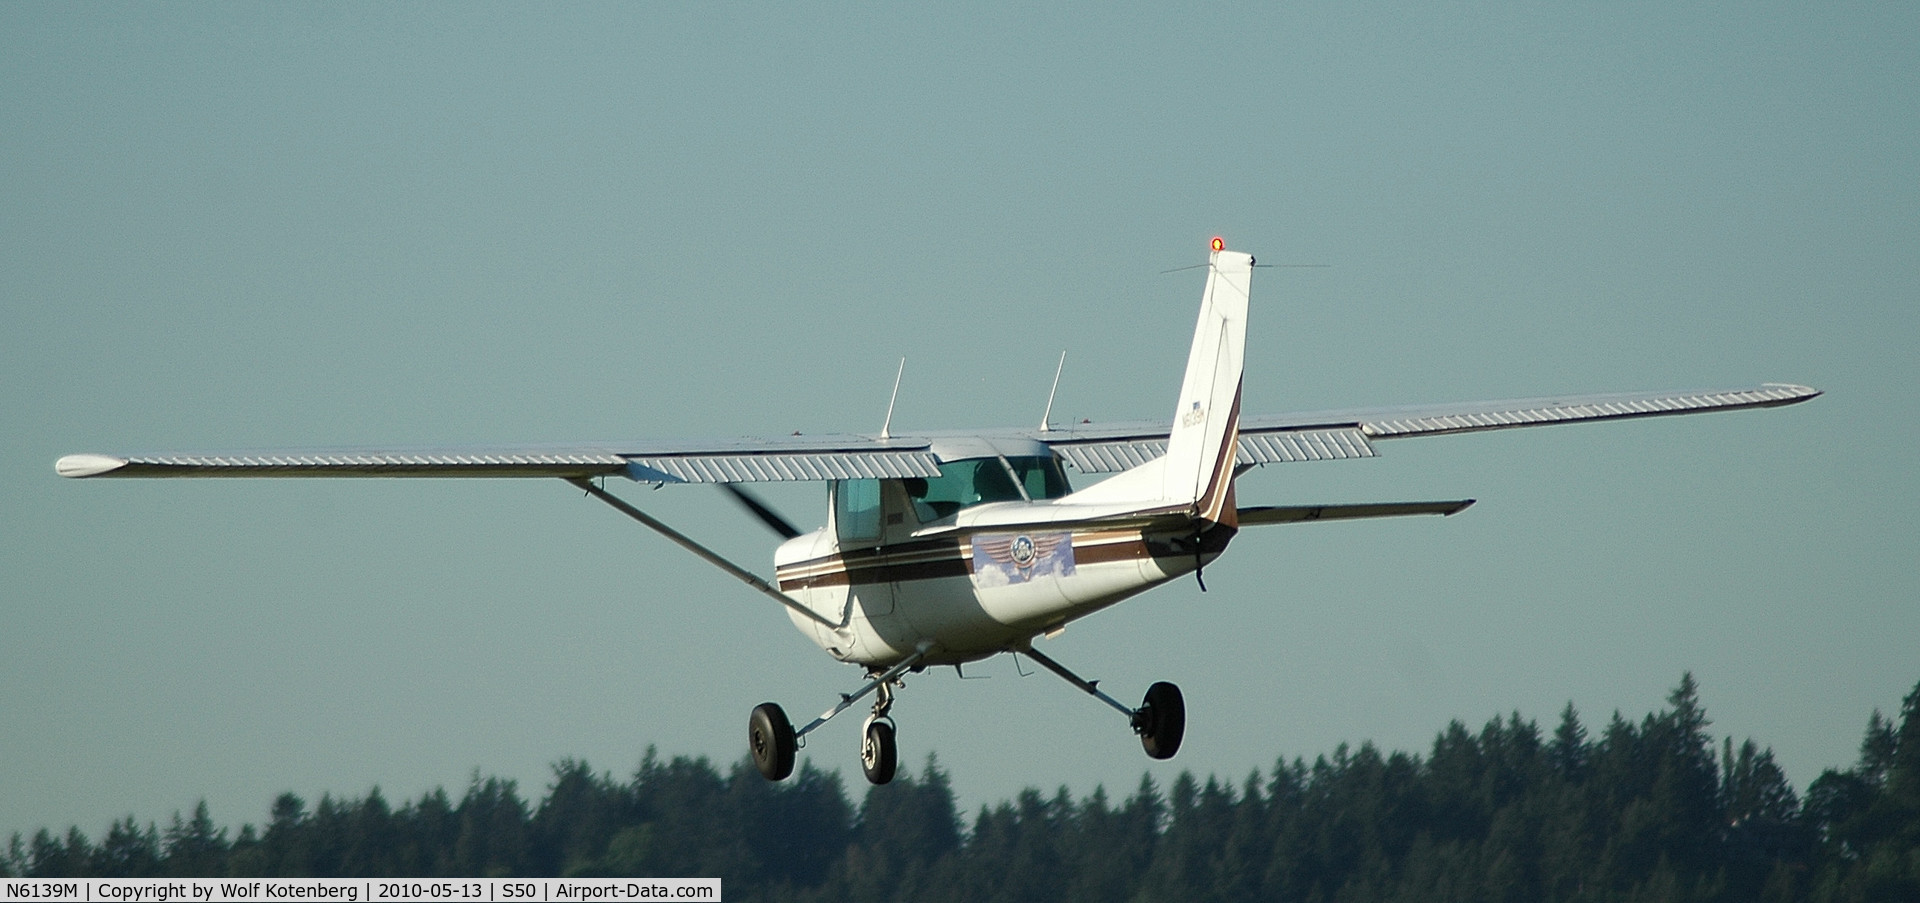 N6139M, 1980 Cessna 152 C/N 15284630, seconds from touchdown